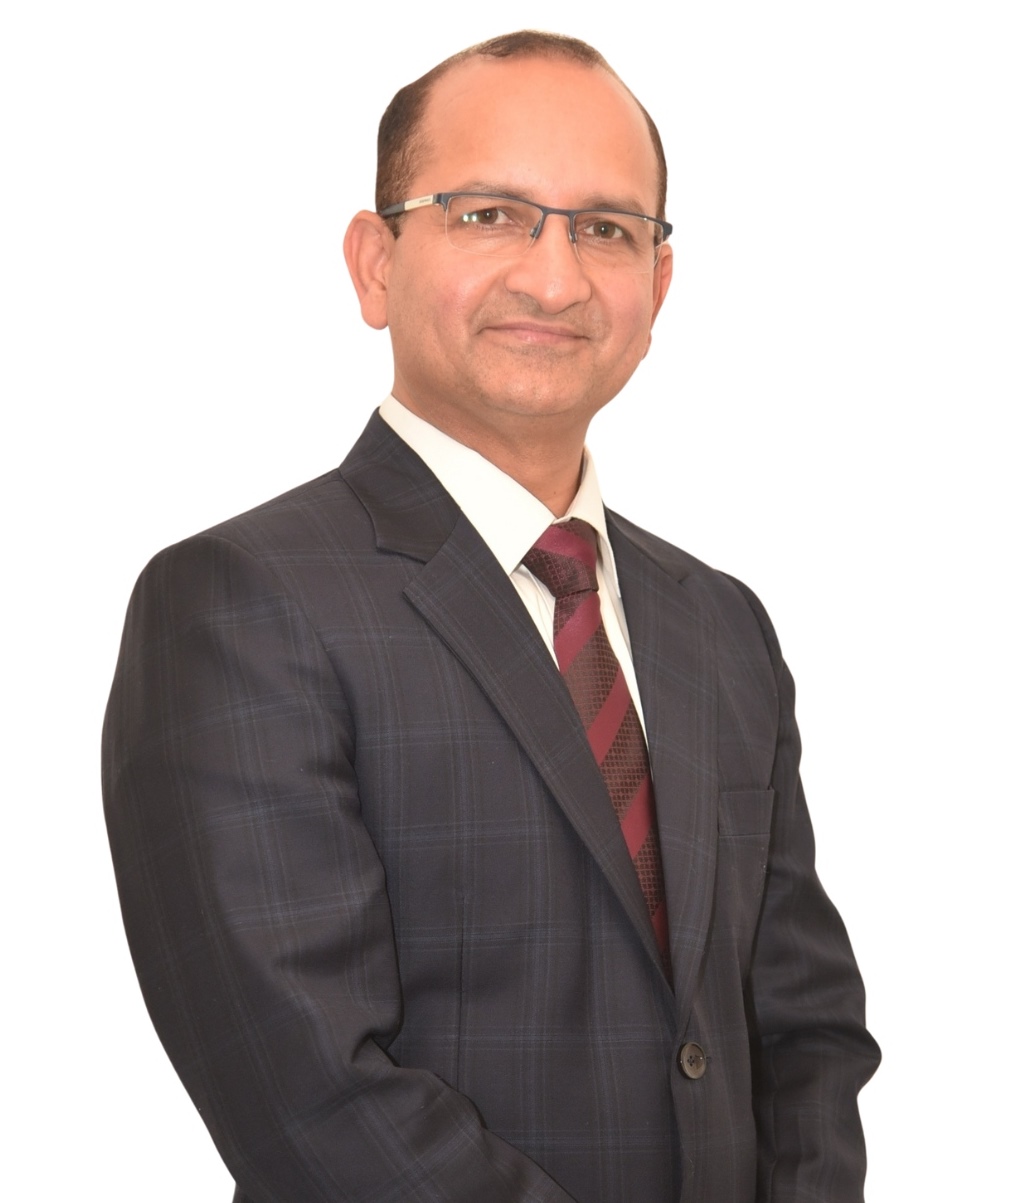  PESB Recommends Sh. Ajay Kumar Sharma as Director (Personnel) of SJVN